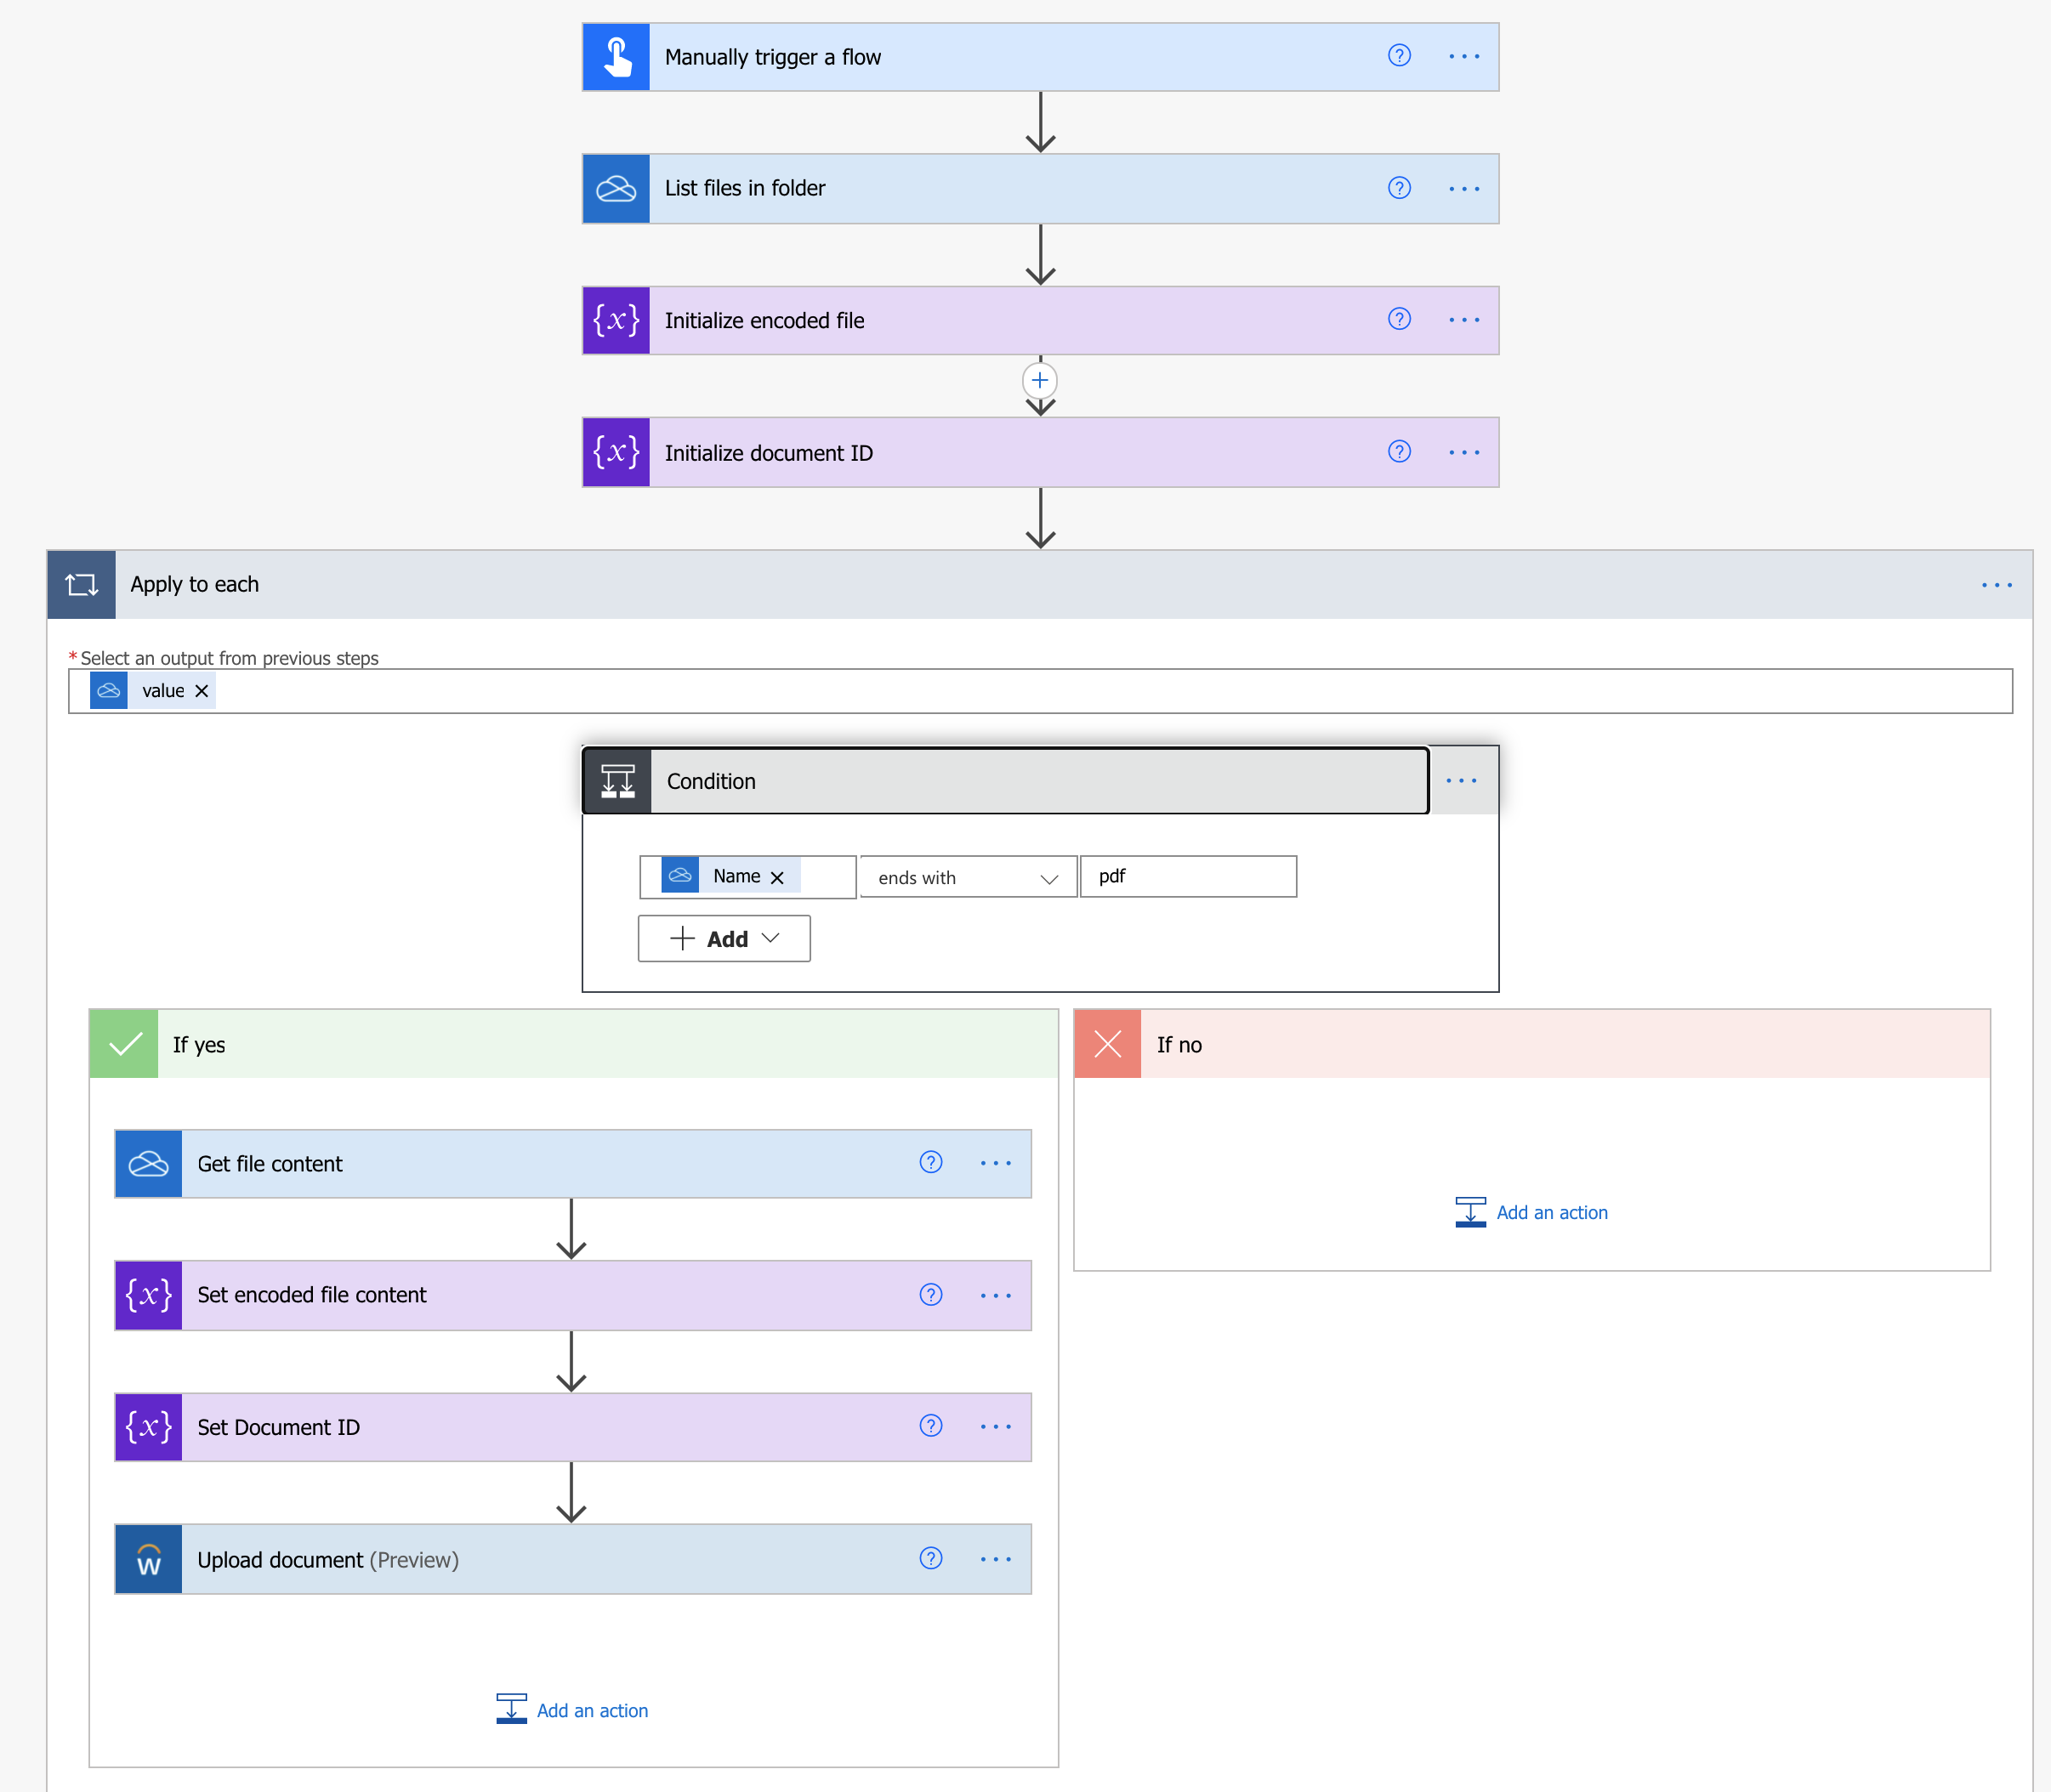 Screenshot of a power automate flow